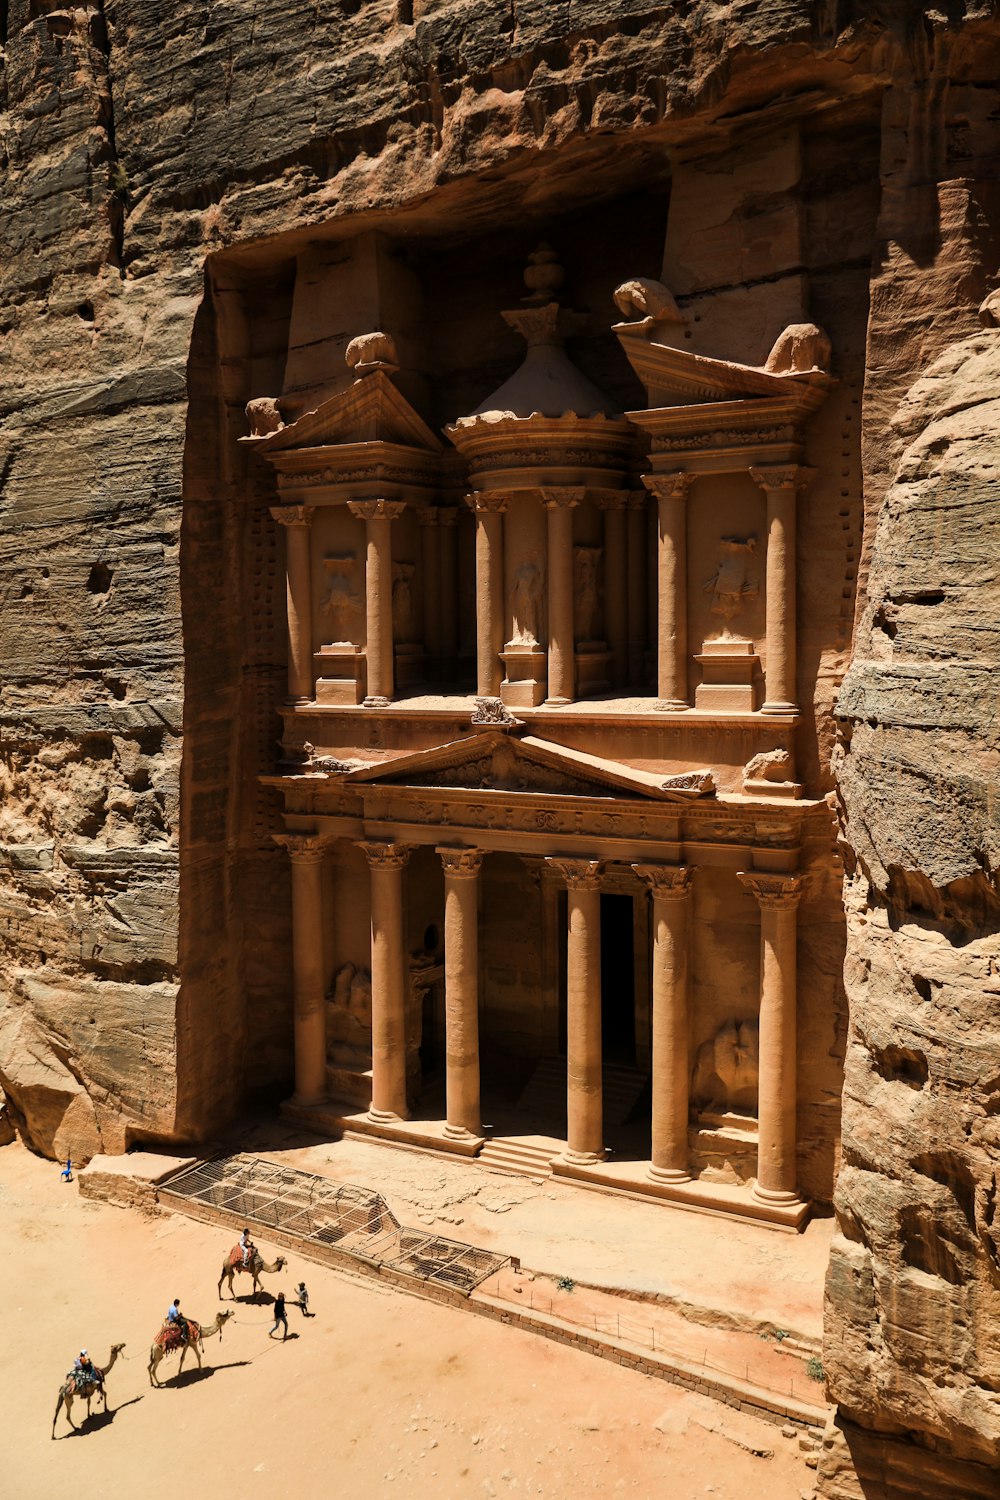 Petra with pillars and people walking around